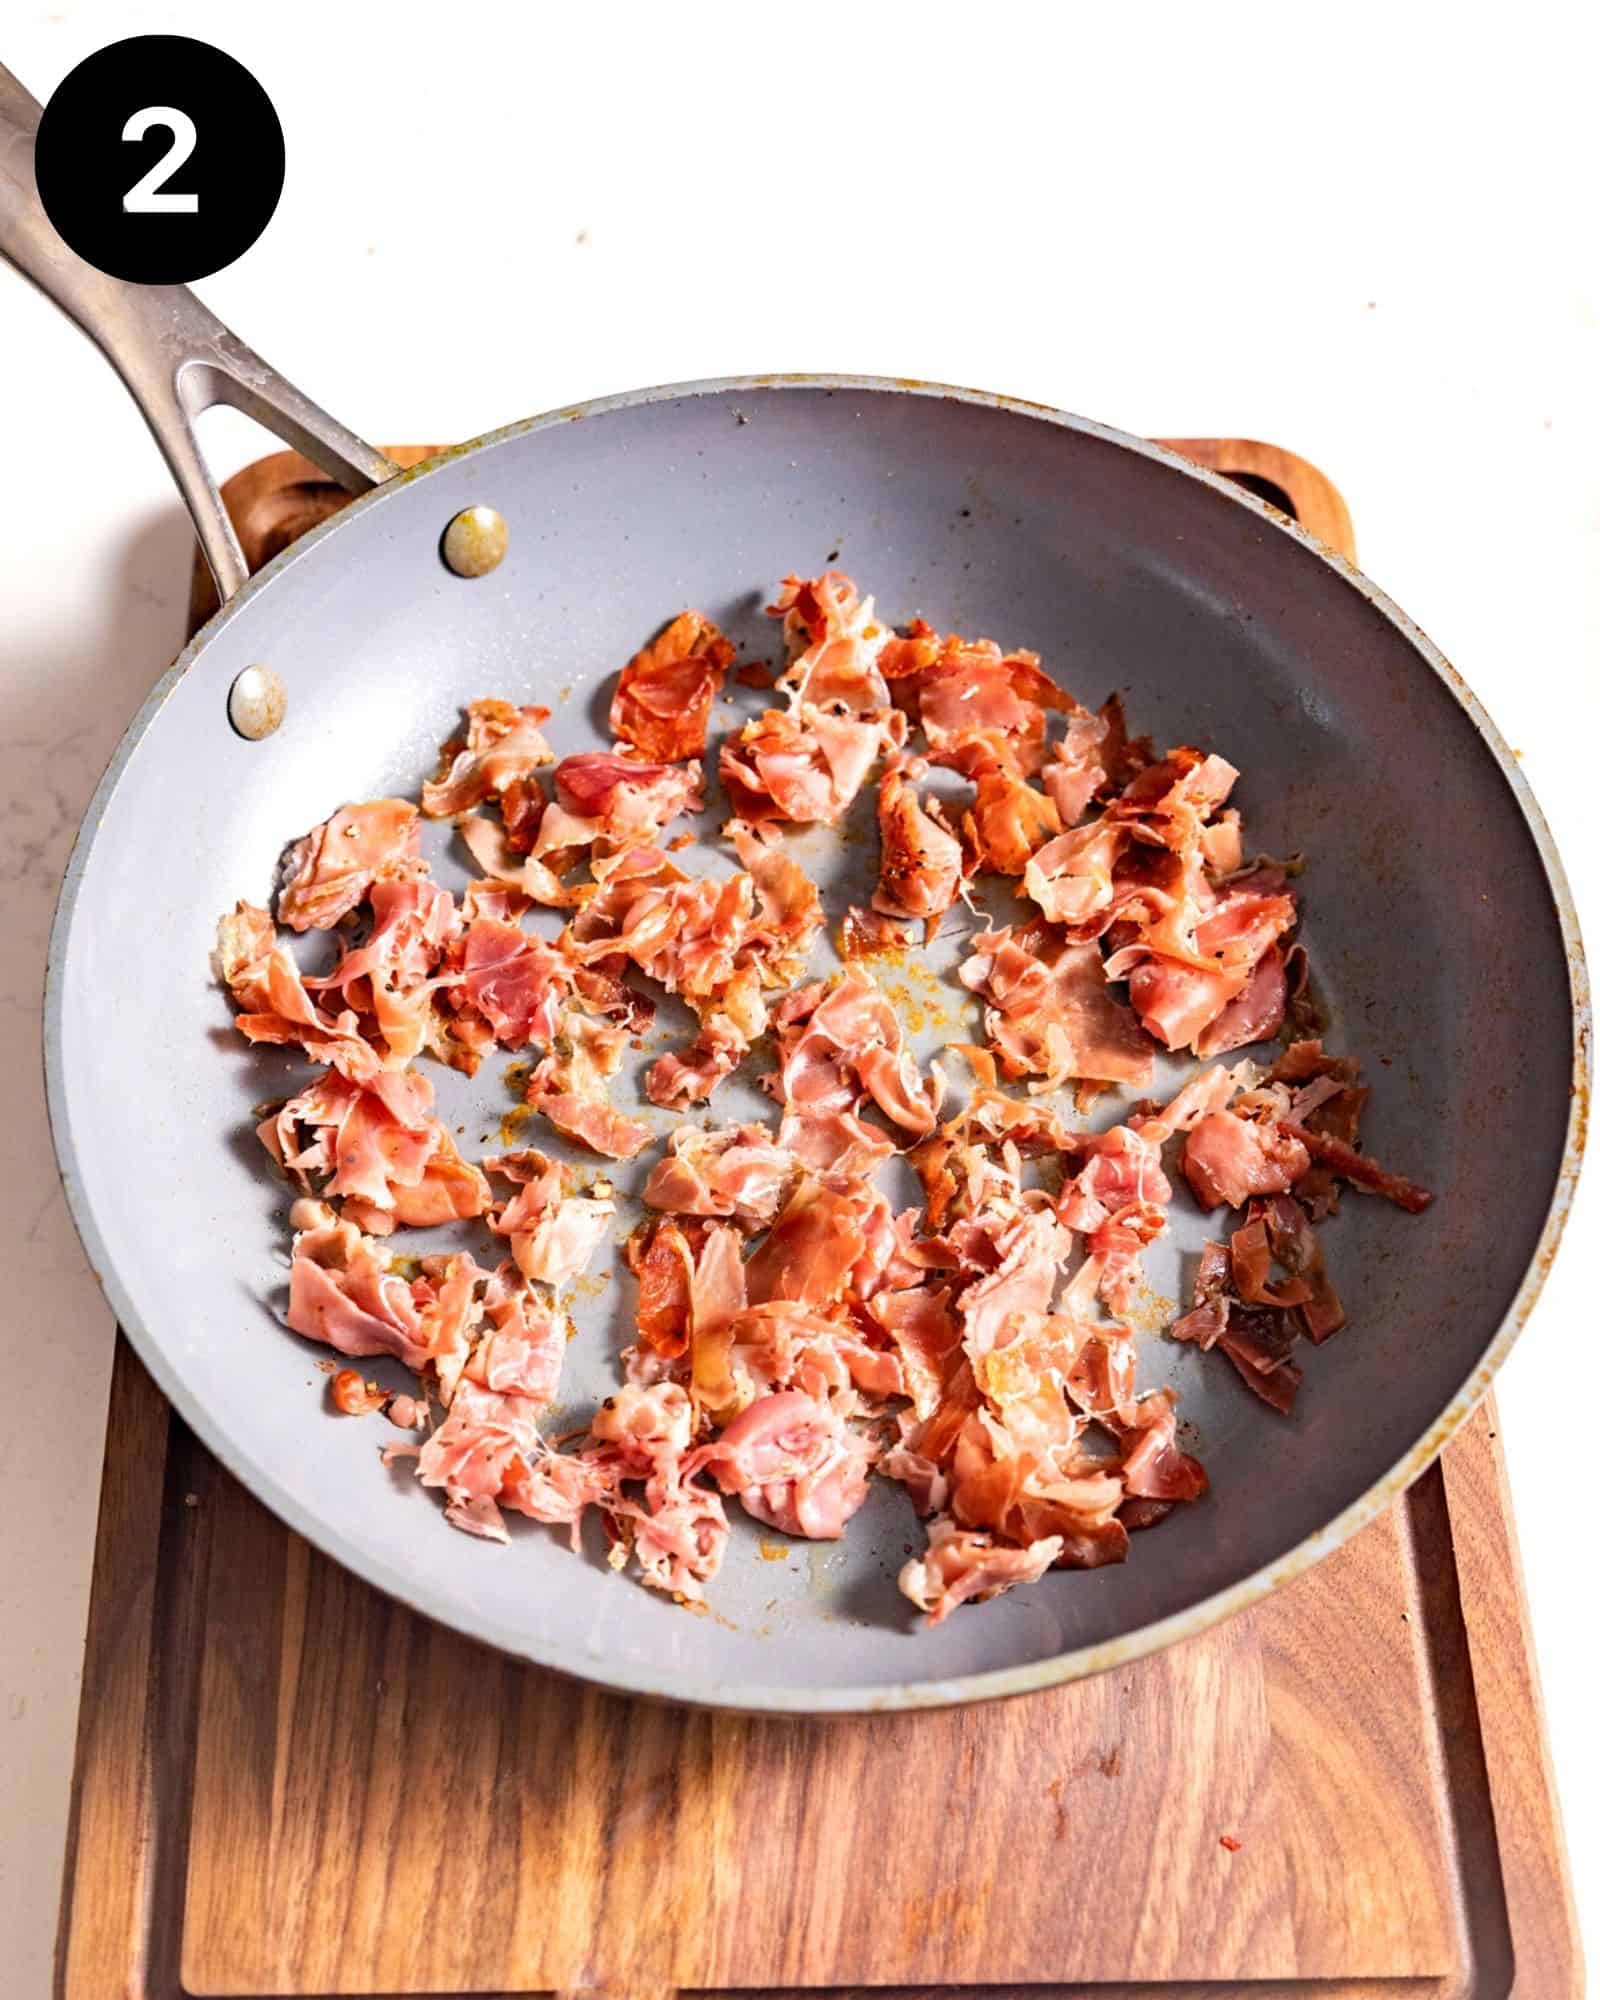 crispy prosciutto in a frying pan.